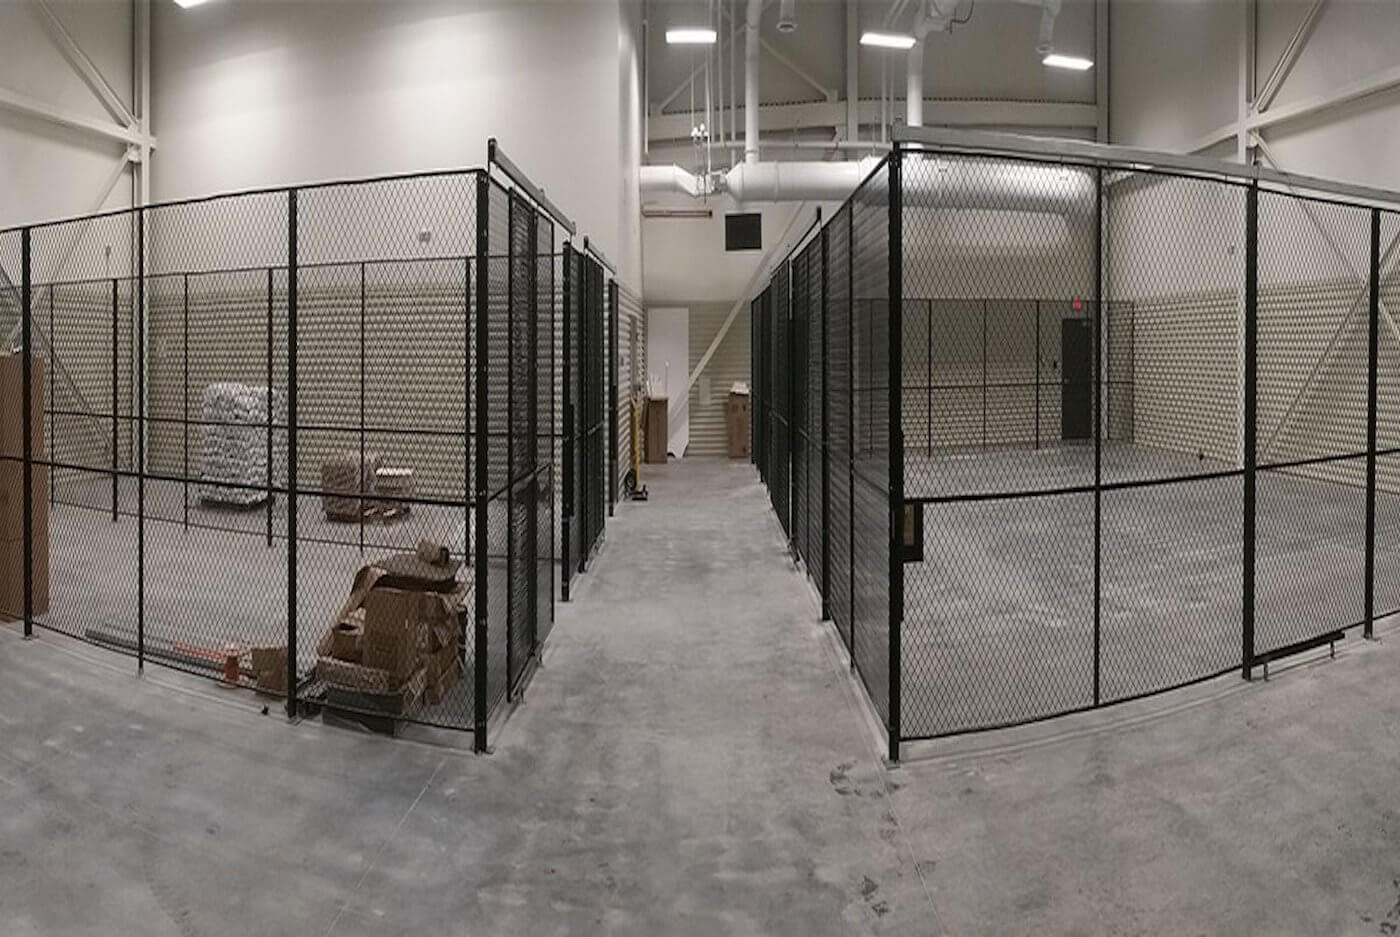 Using Security Cages In Your Warehouse: How to Secure Your Items With Wire Mesh Cages